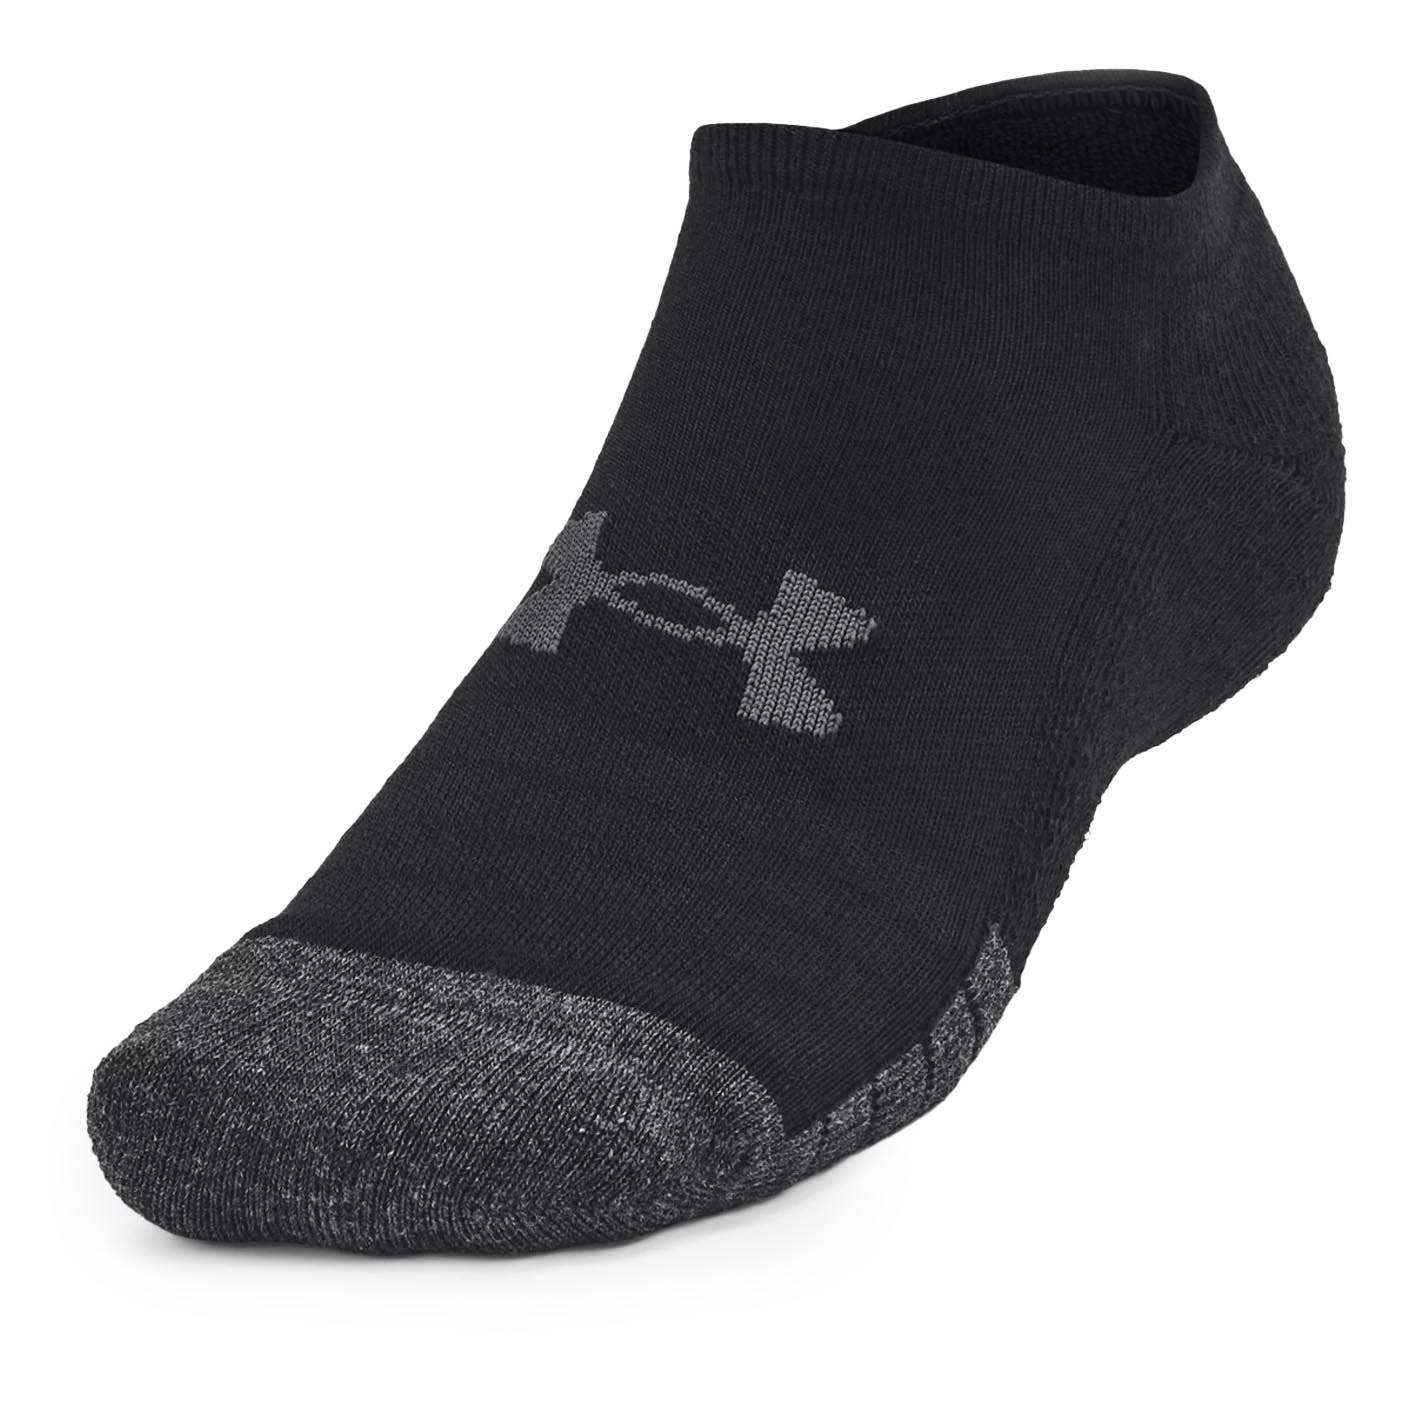 UNDER ARMOUR PERFORMANCE TECH LOW CUT SOCKS (3 PACK)